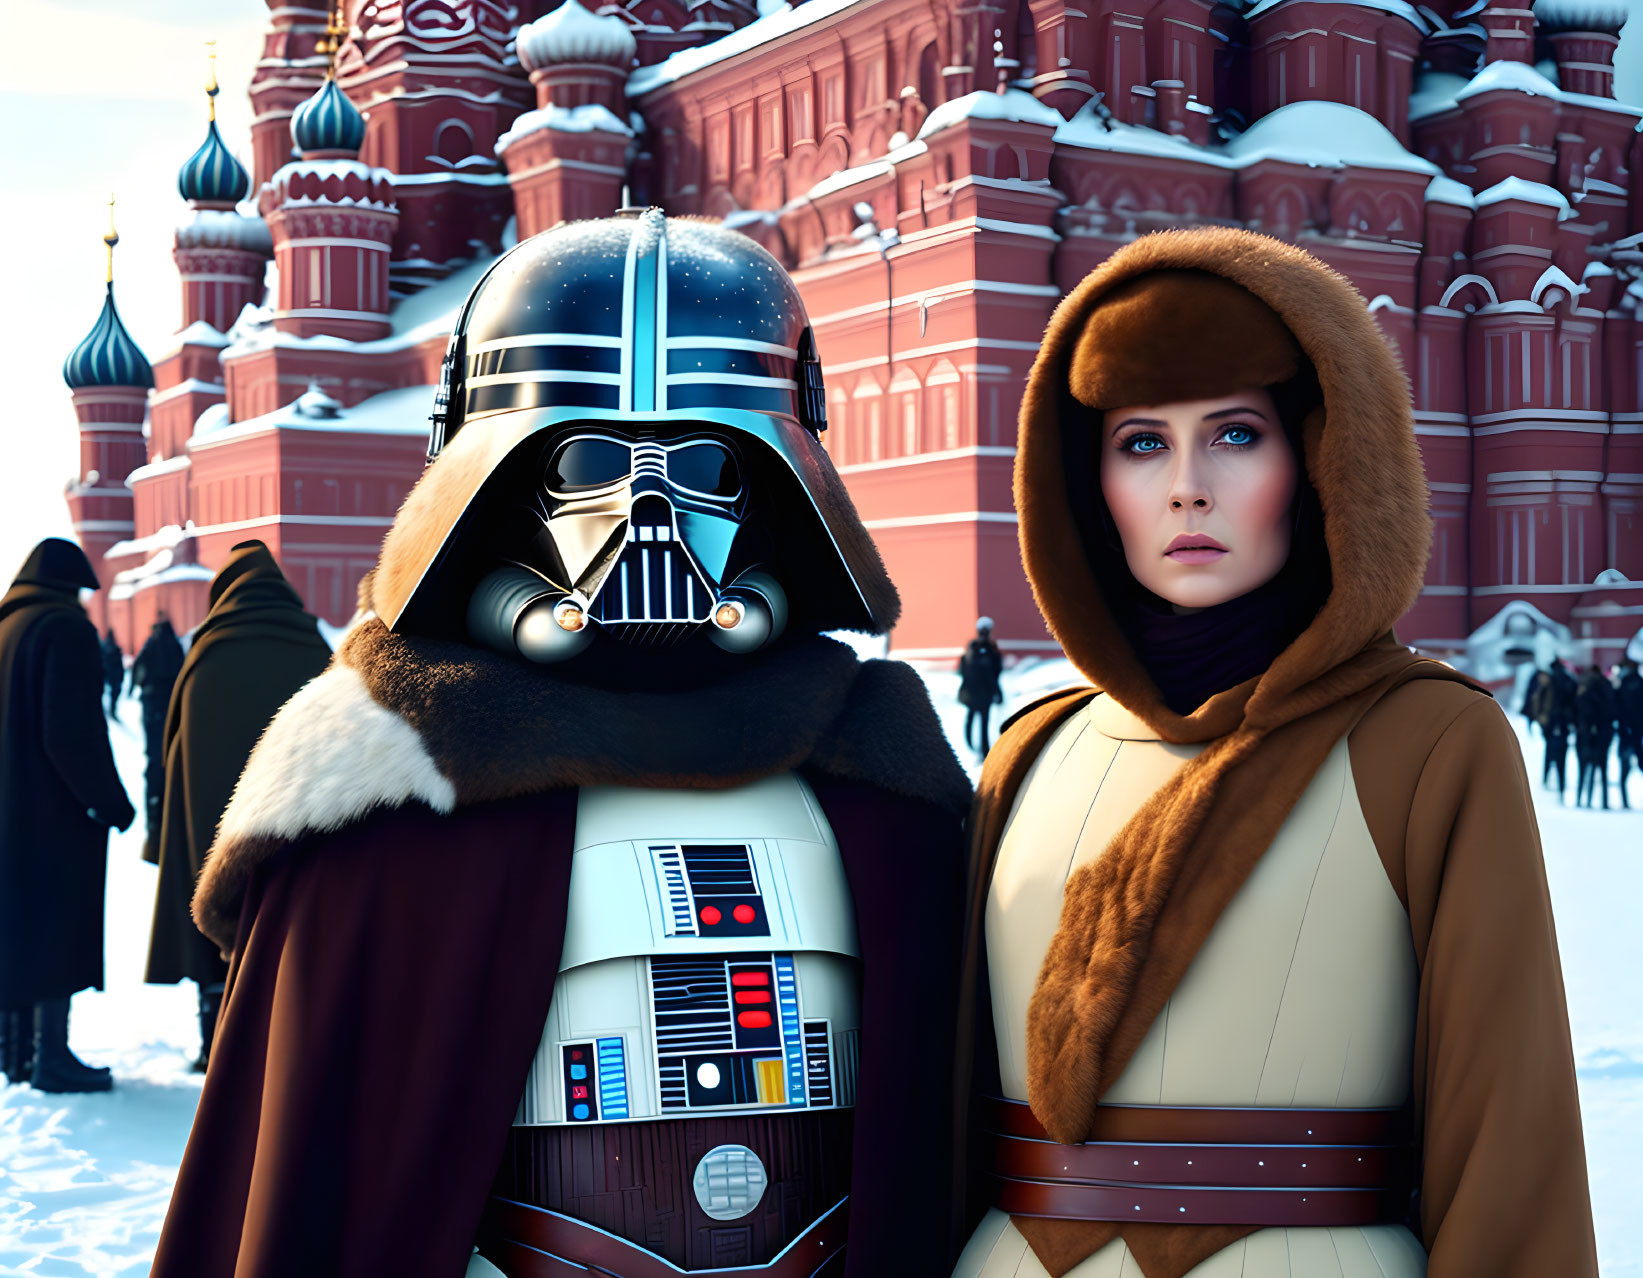 Detailed Darth Vader costume next to person in winter coat with snowy Russian landmark